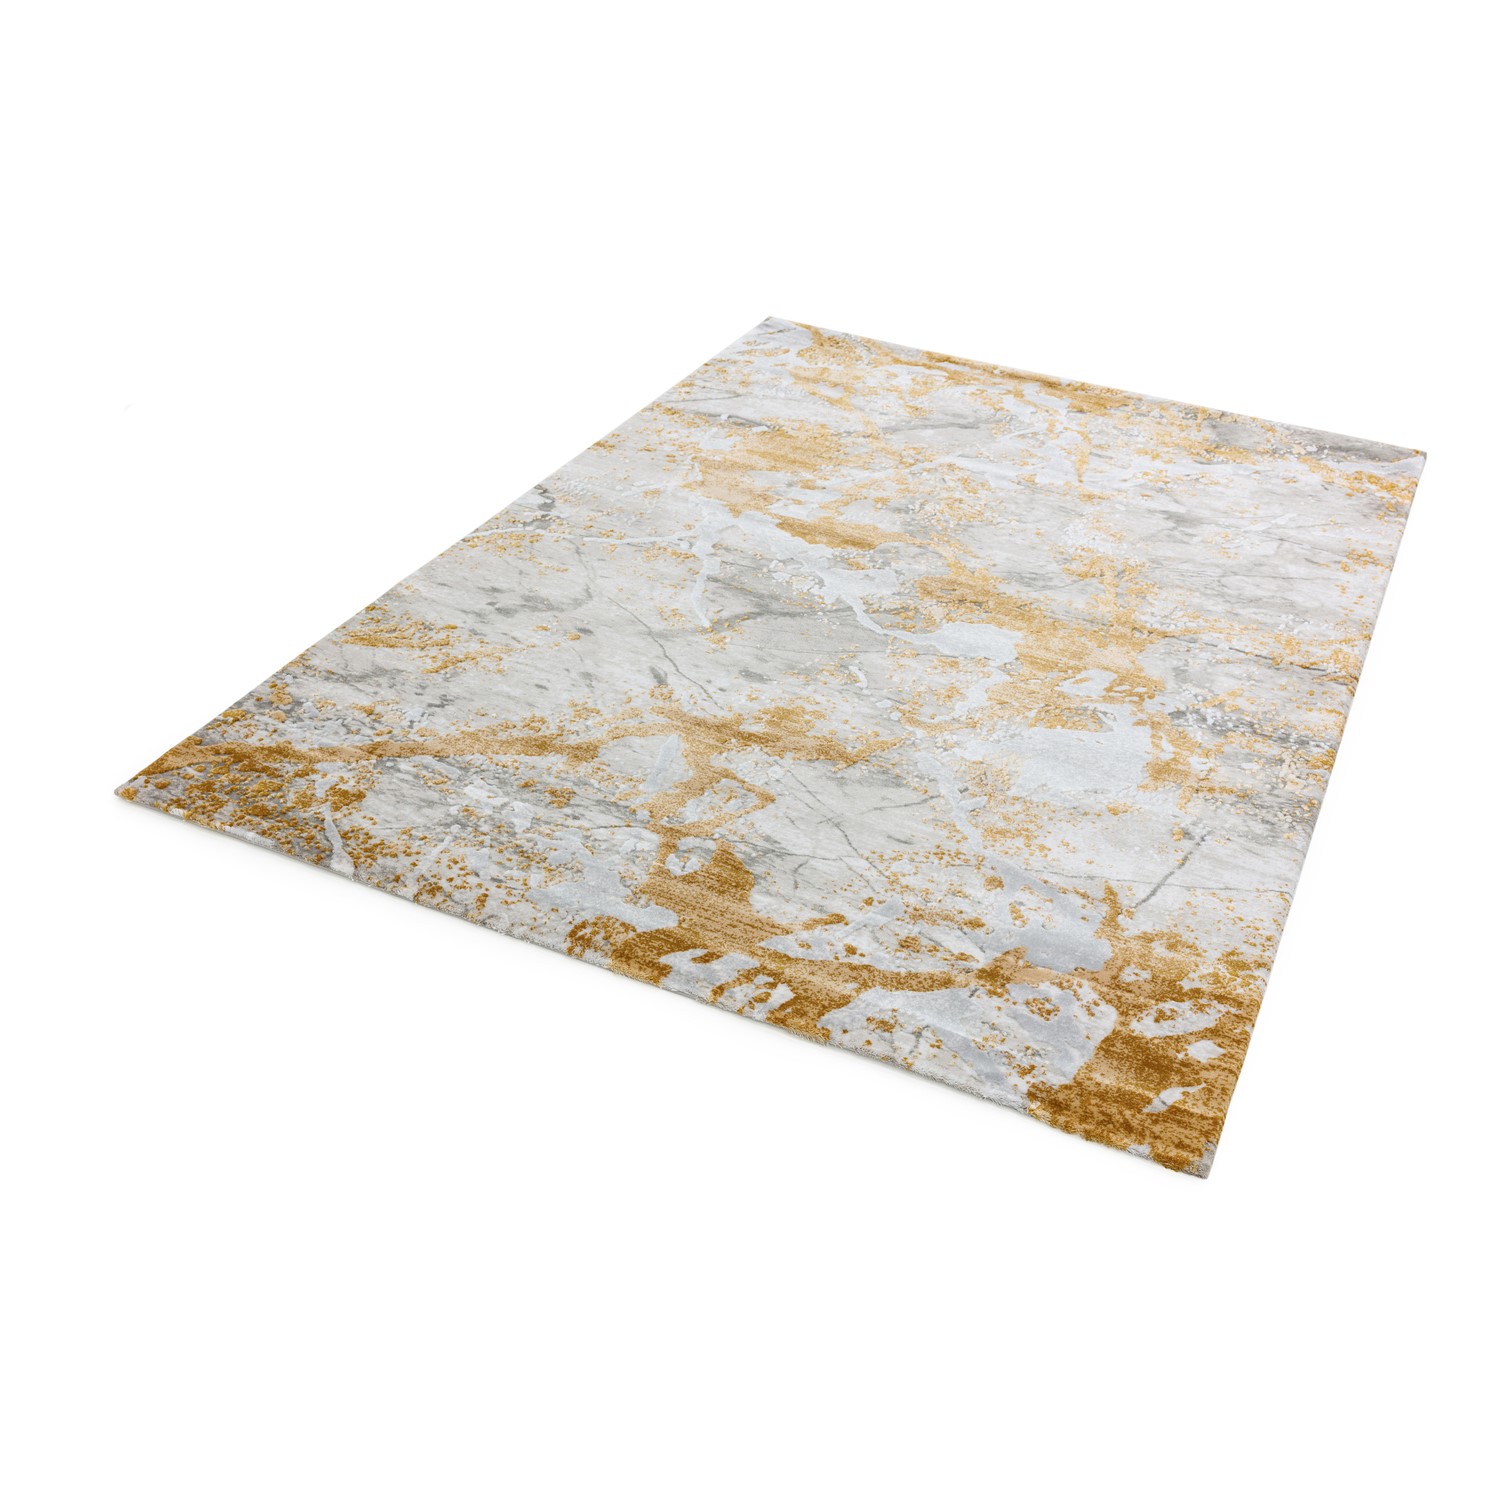 Large Yellow Rug with Marble Effect - 120x180cm - Astral - Furniture123